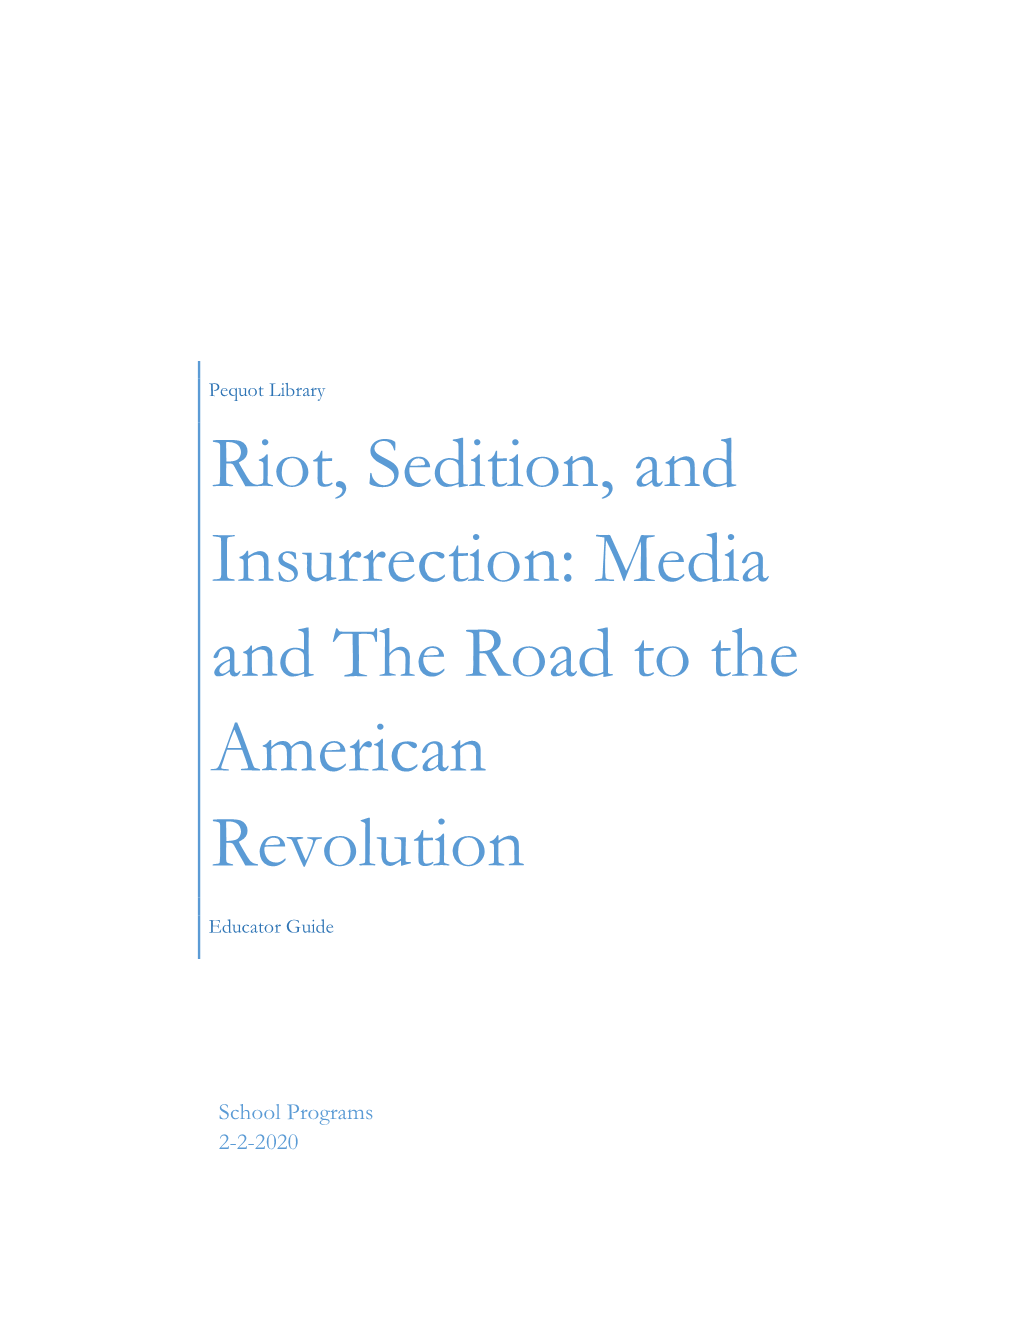 Riot, Sedition, and Insurrection: Media and the Road to the American Revolution